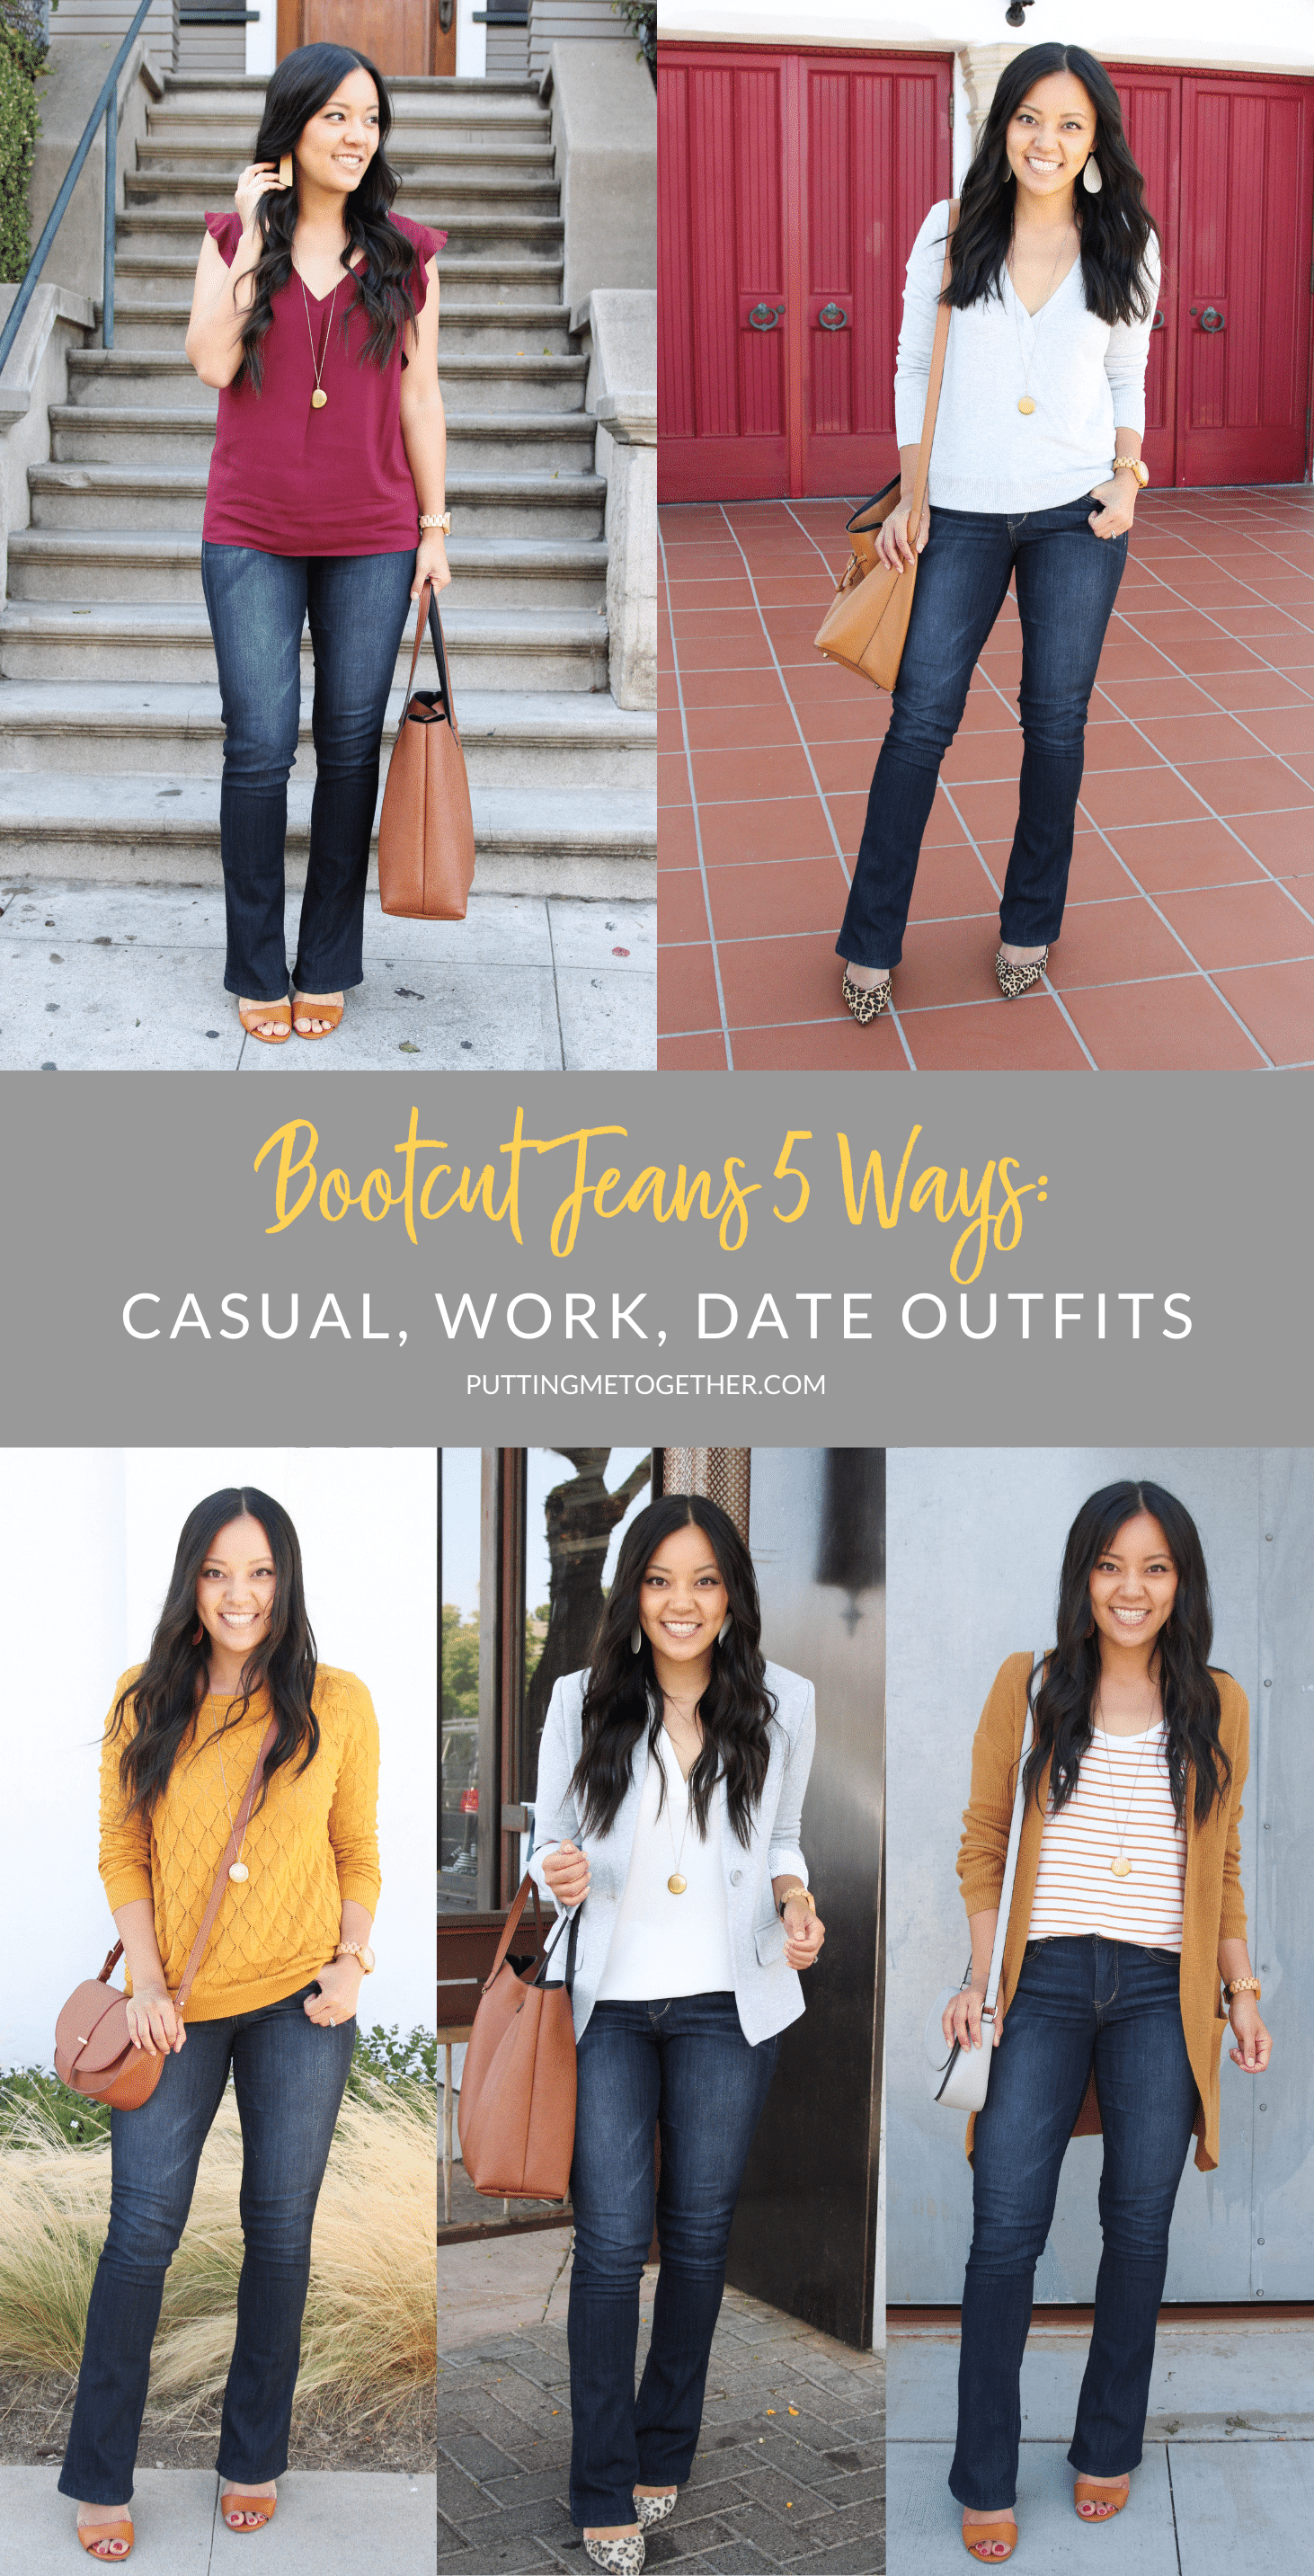 How to Wear Black Bootcut Jeans: 5 Tips to Look Effortlessly Chic!